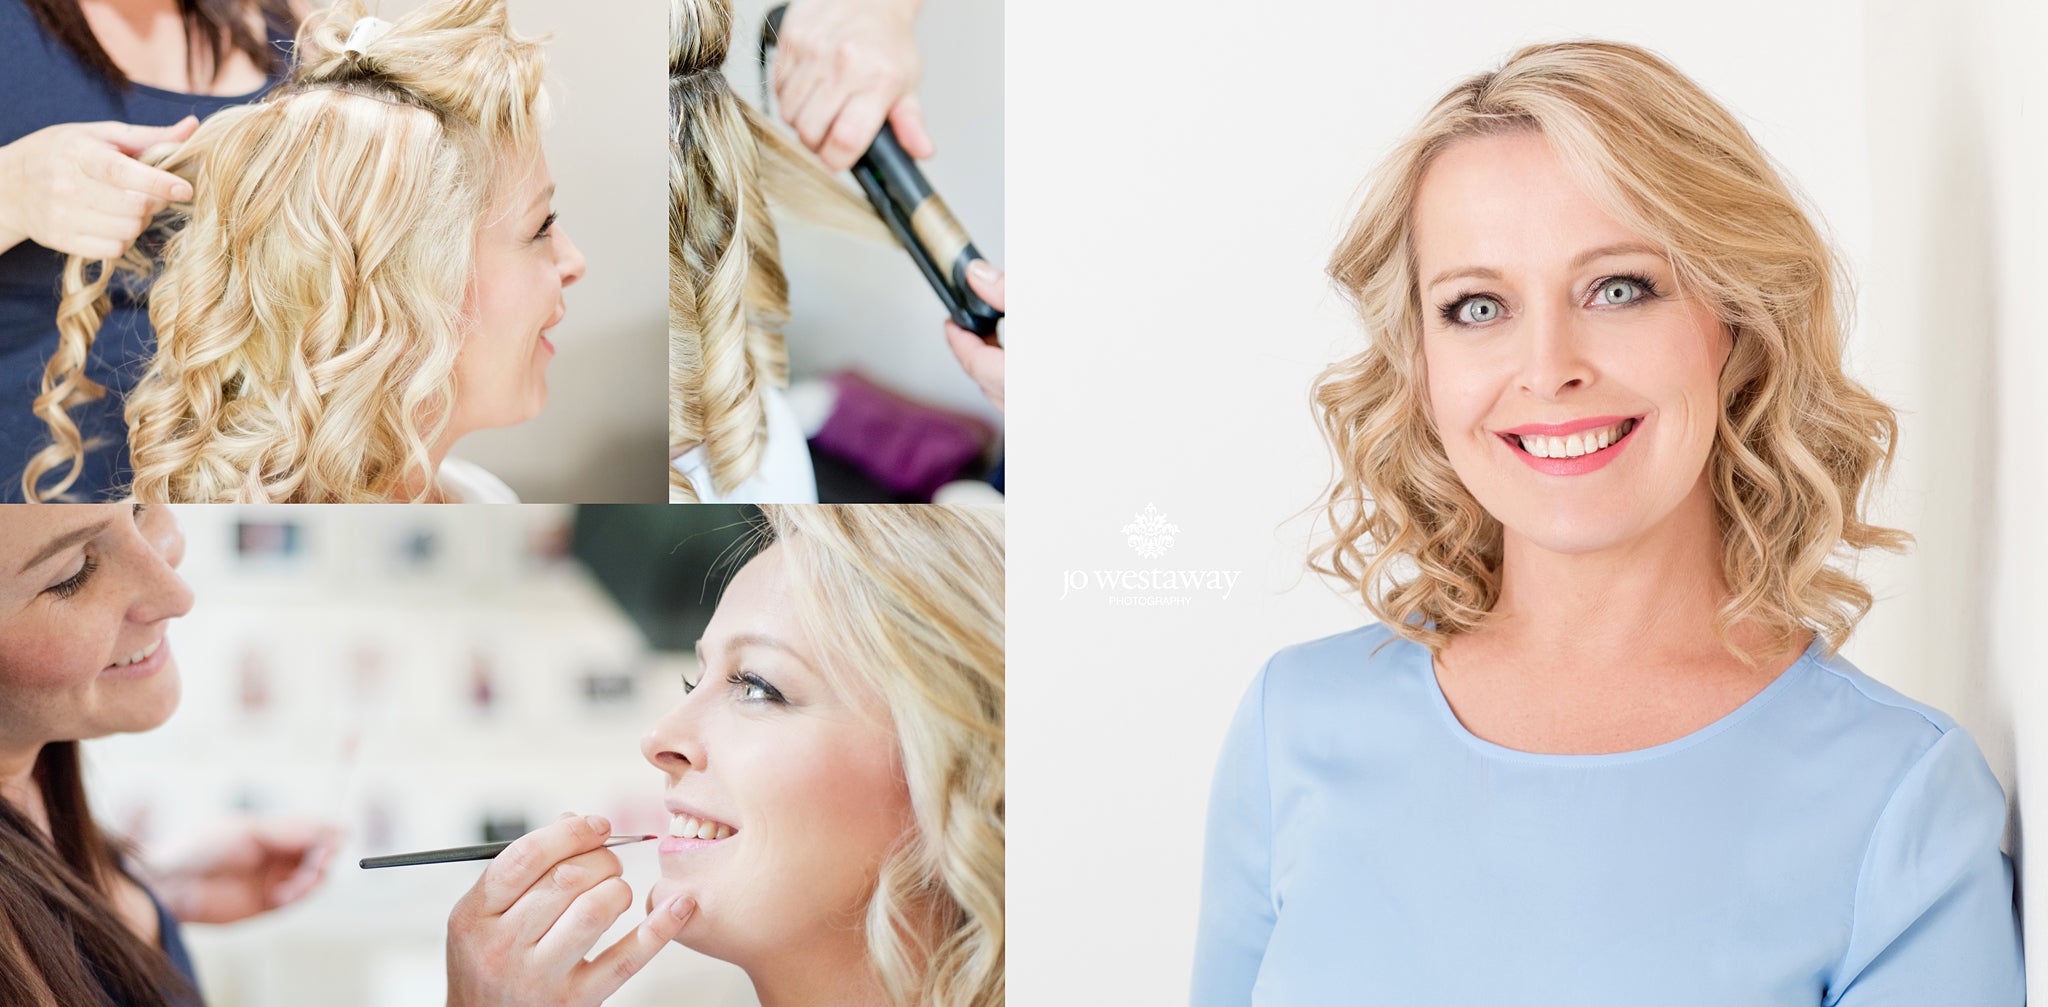 Hair and makeup and modern headshots - stunning images